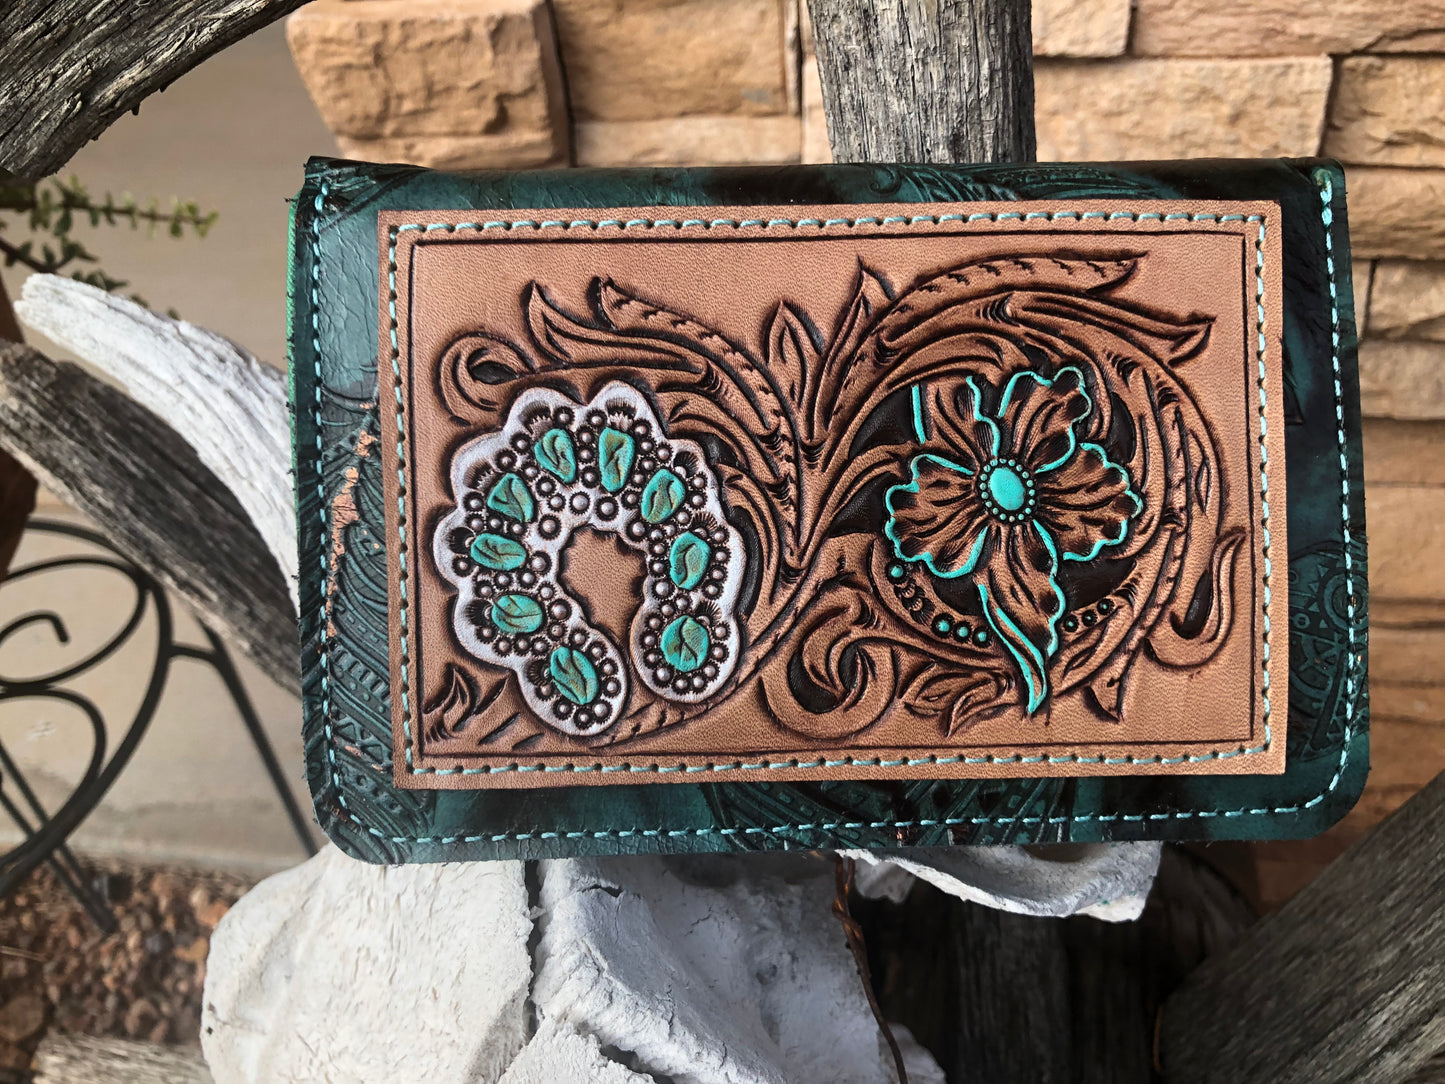 Western tooled leather floral and squash blossom patch on embossed feather leather manicure kit